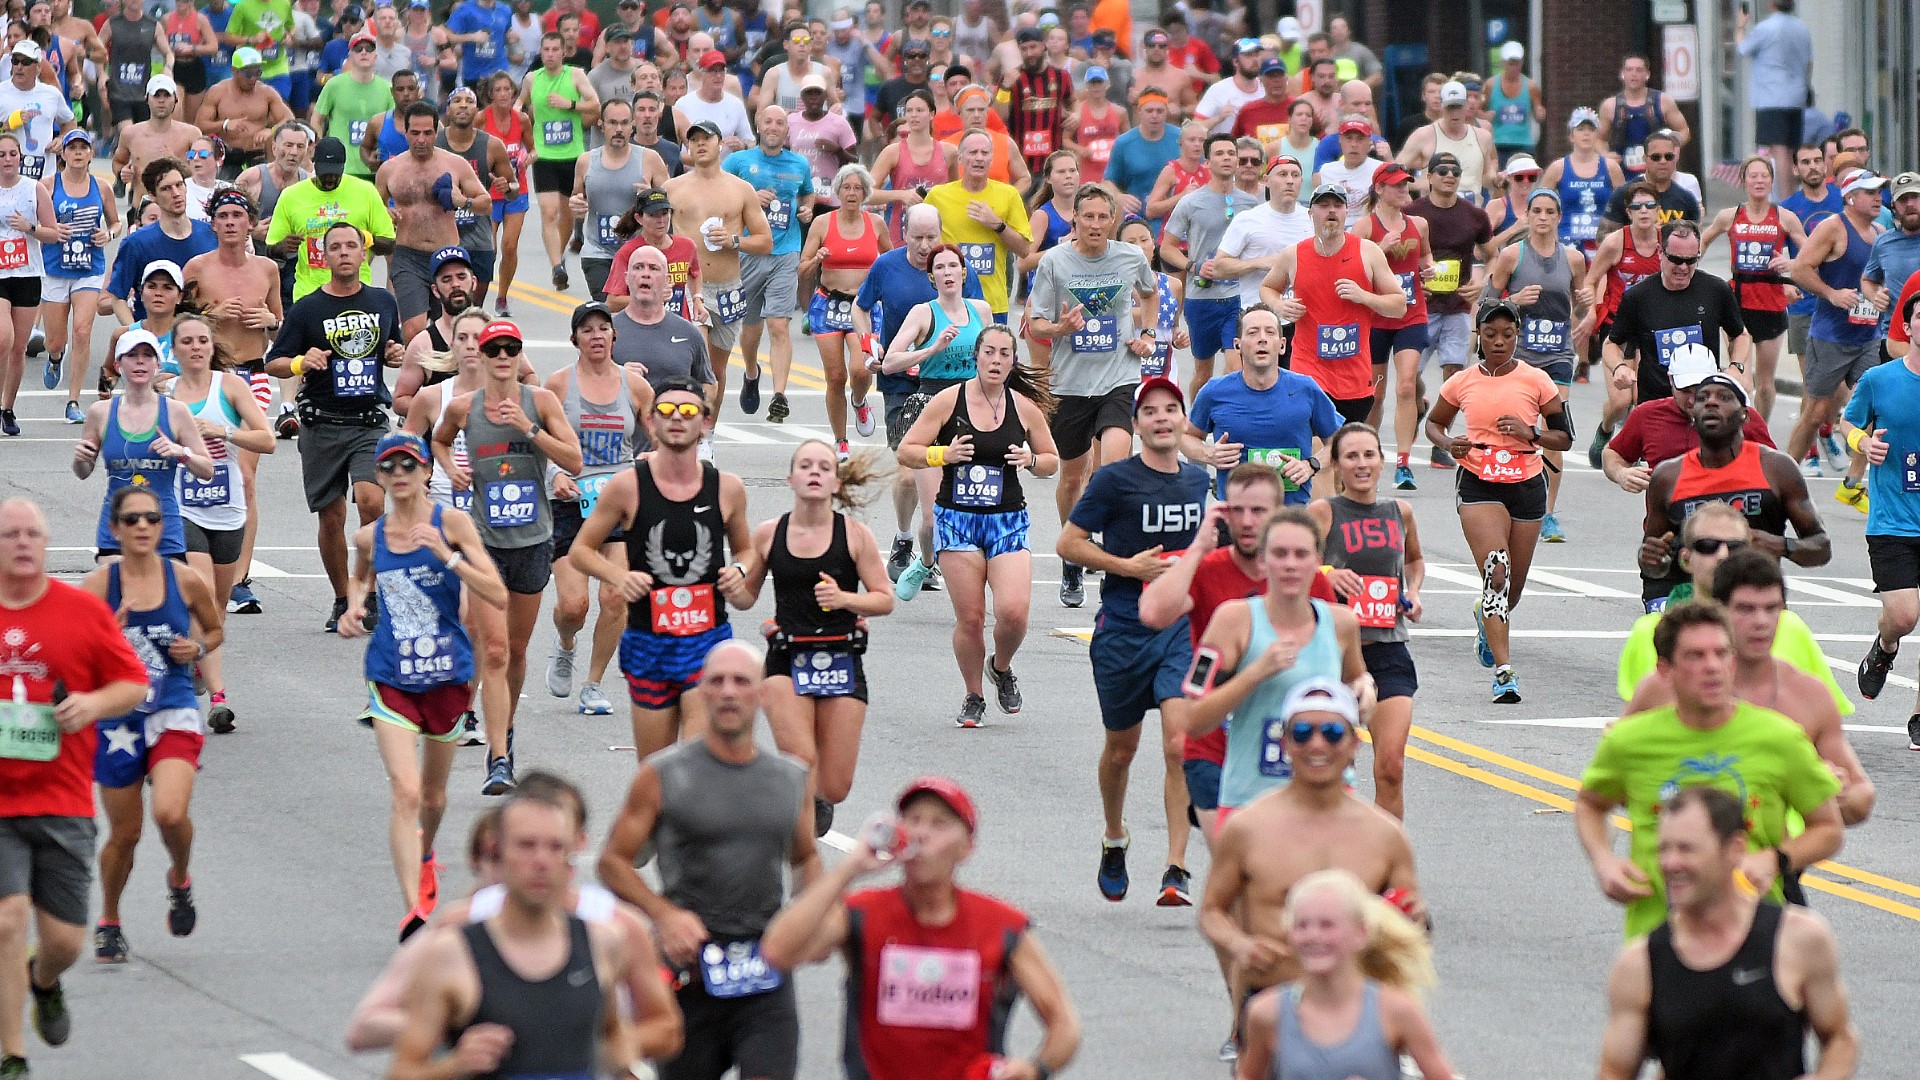 Peachtree Road Race in 2021 will be over 2 days in person